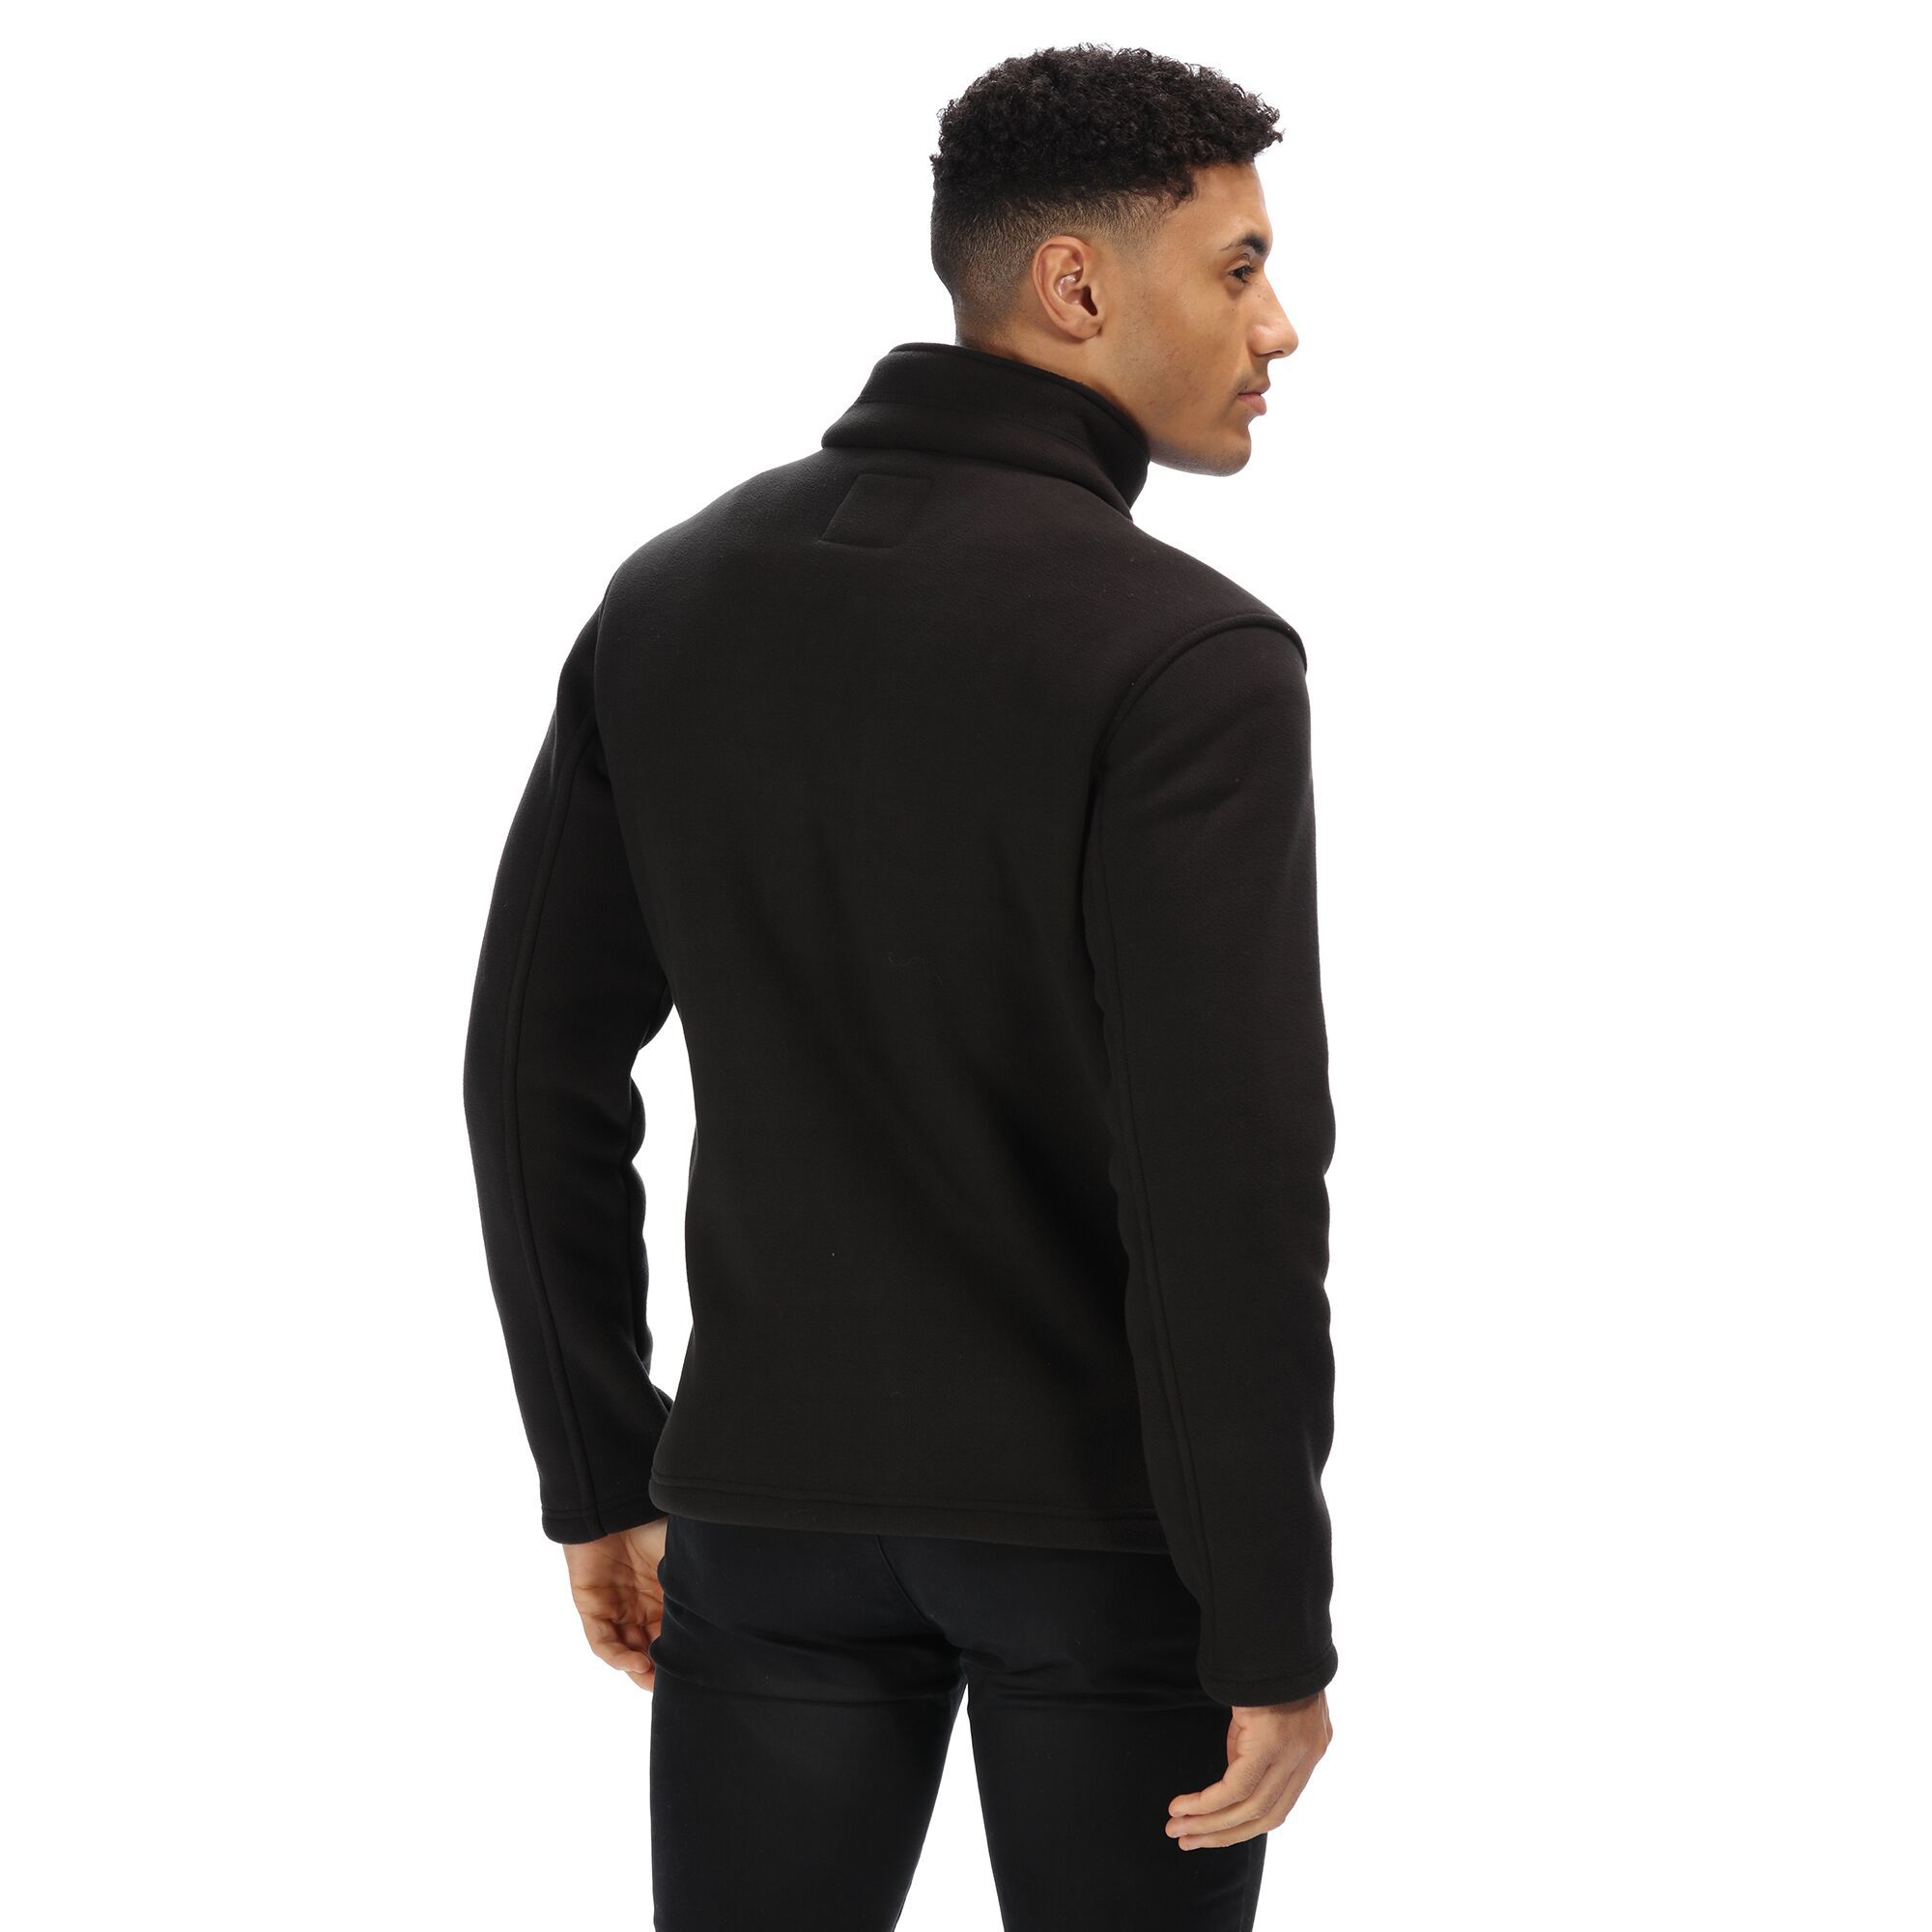 Mens full zip jacket made of 440gsm sherpa backed Polyester microfleece. 2 zipped lower pockets. Adjustable shockcord hem. Ideal for wearing outdoors on a cold day. 100% Polyester.